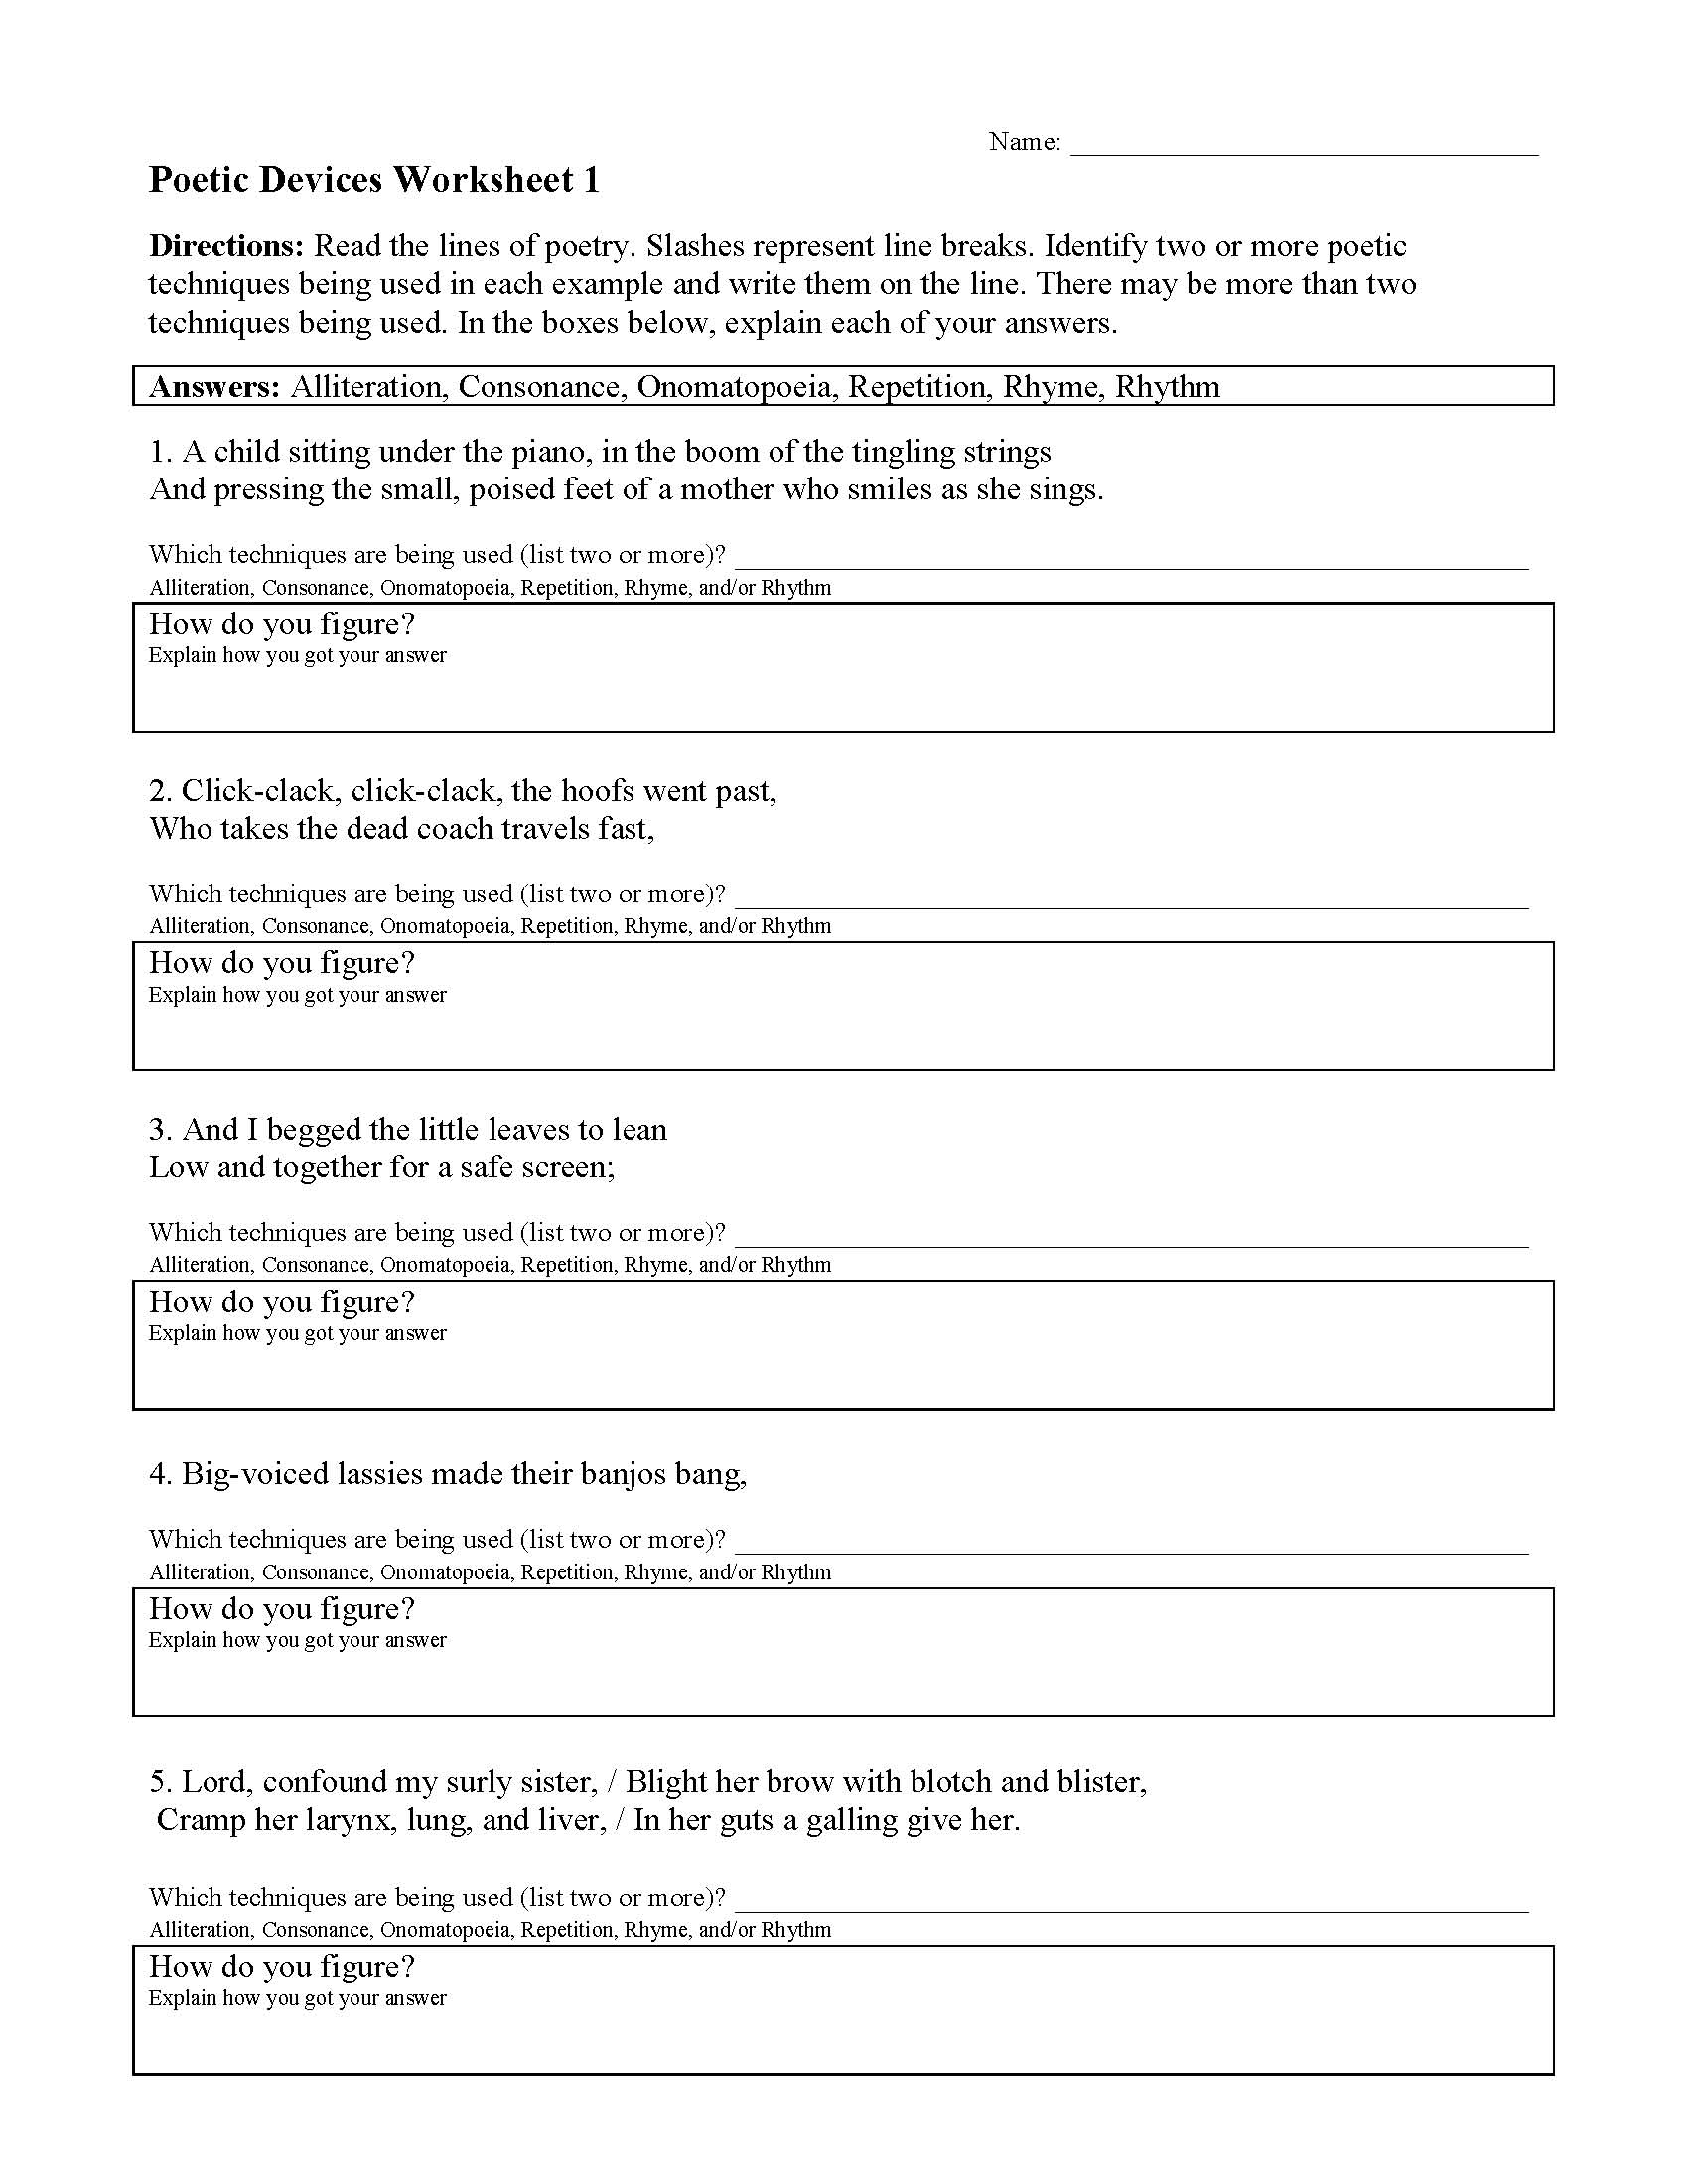 Poetic Devices Worksheet 1 | Preview